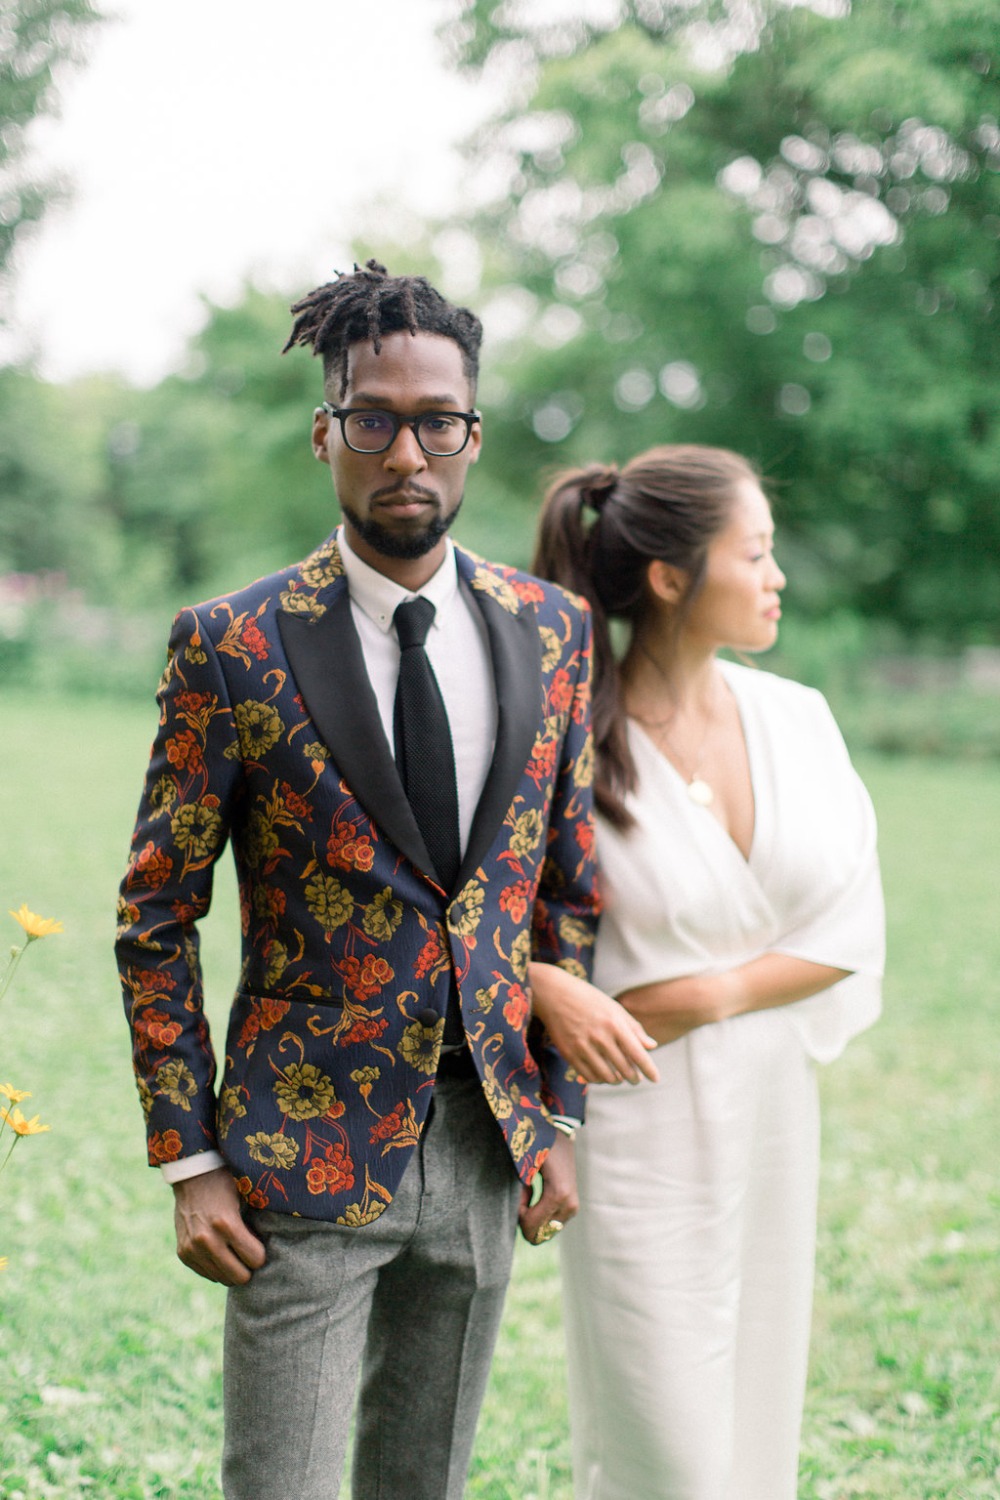 Bold jacket for the groom